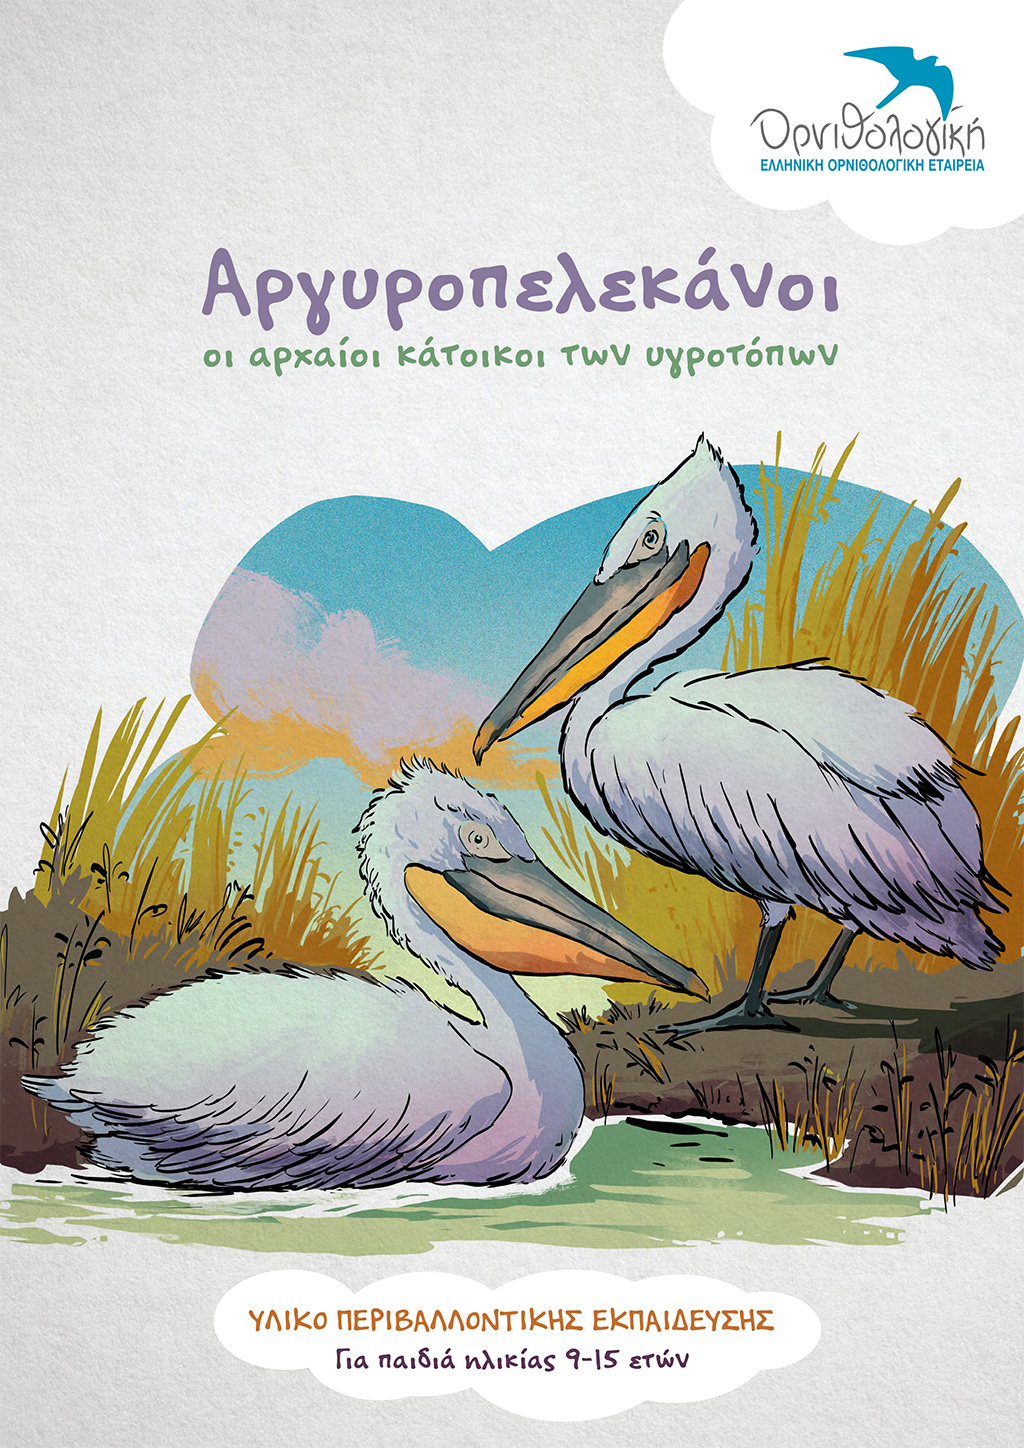 Dalmatian pelican Education kit for children aged 9-15 years